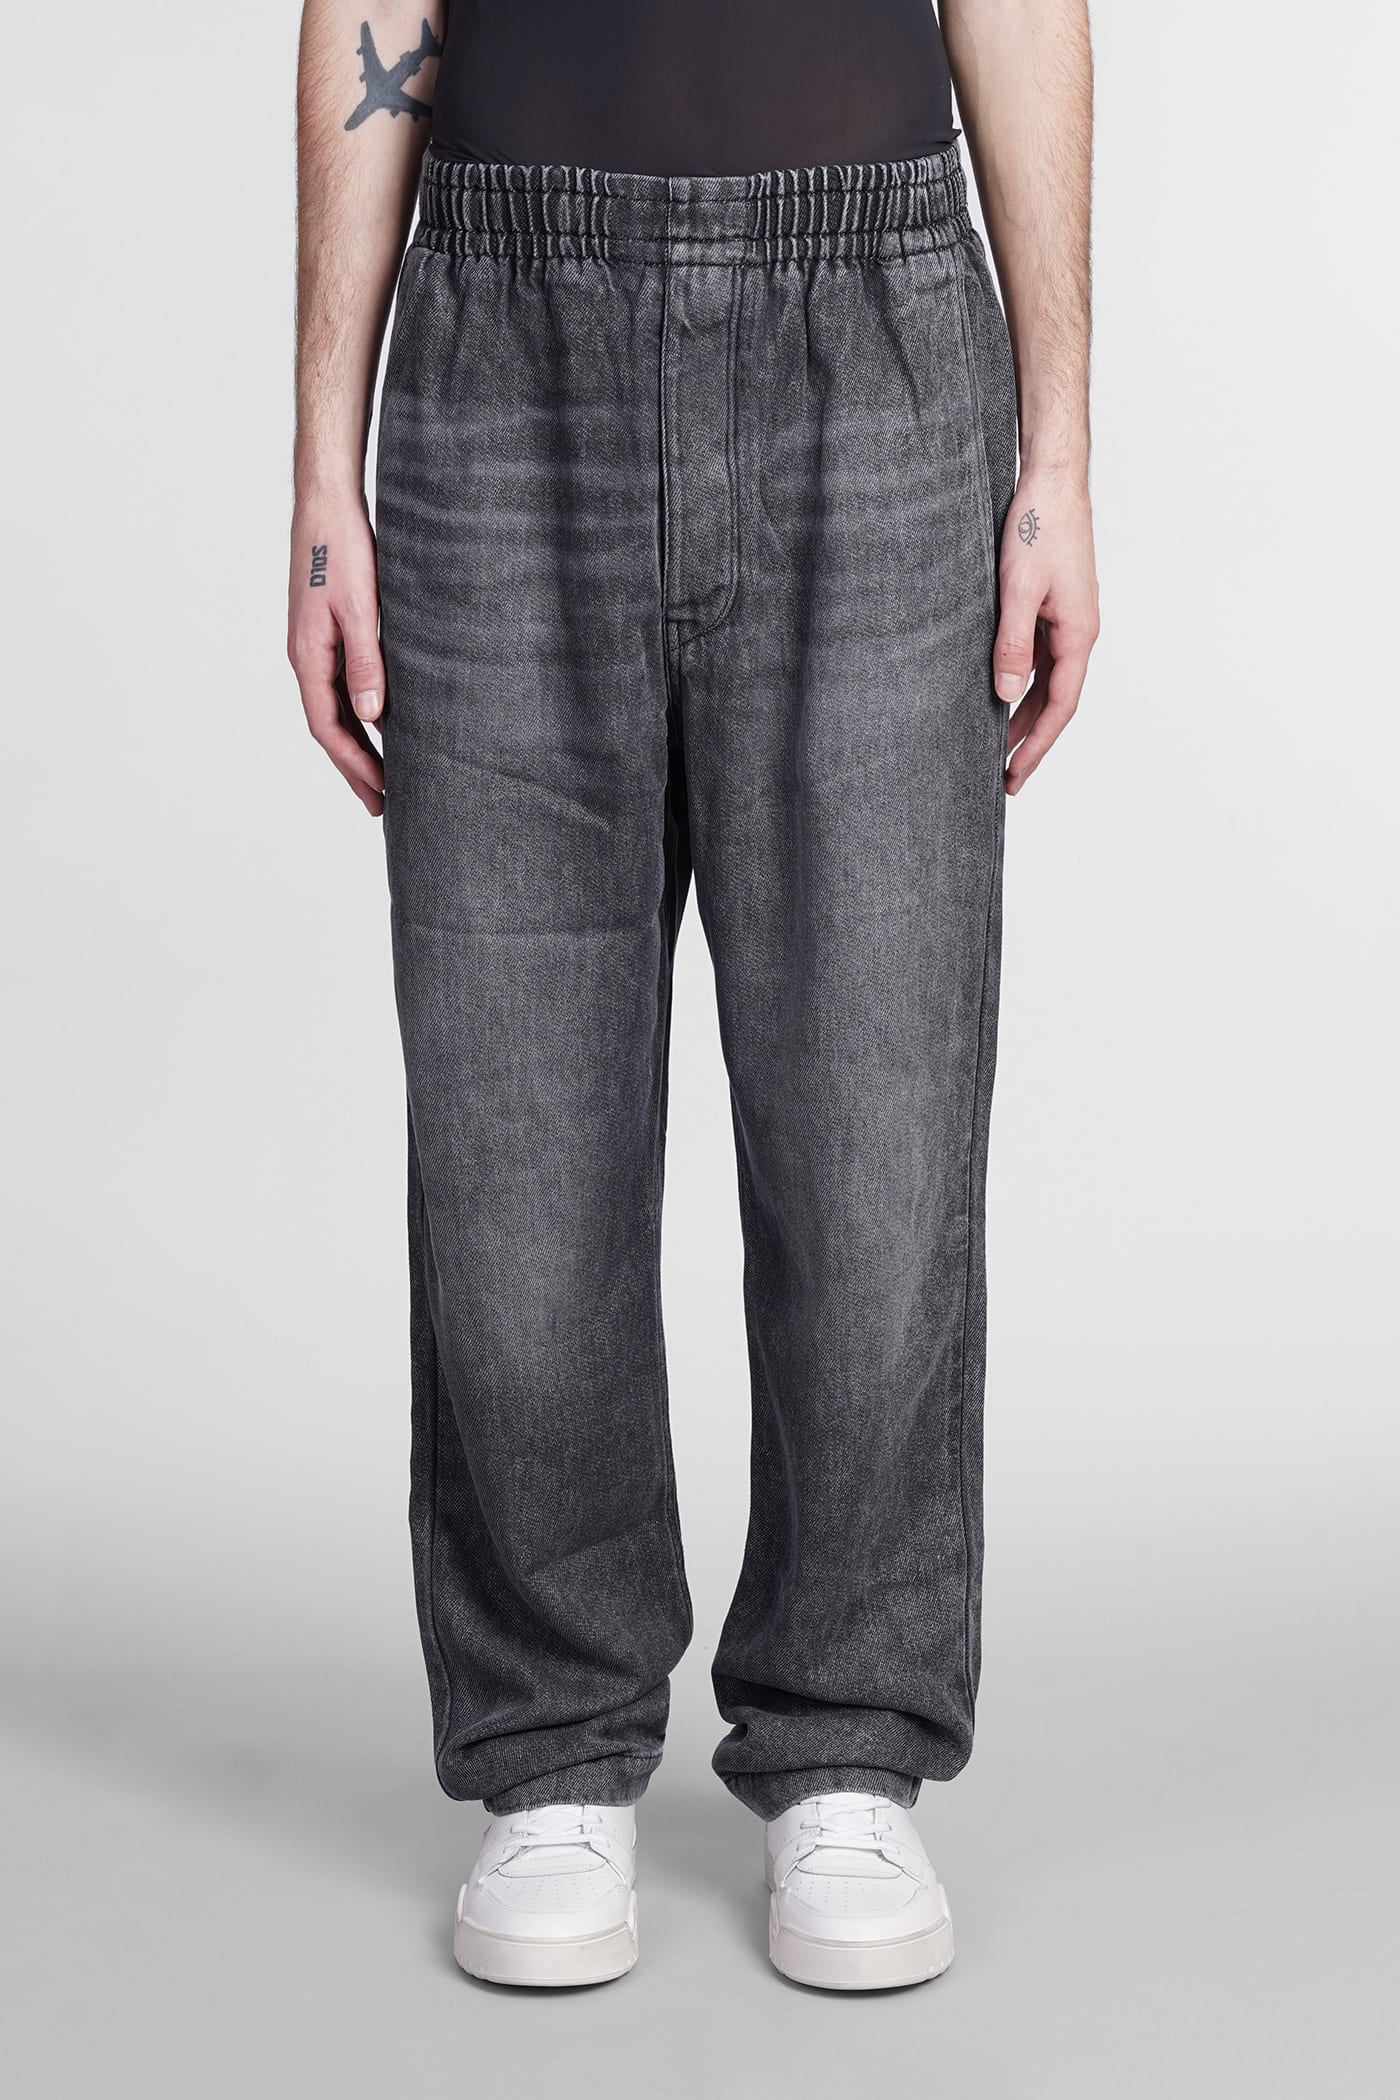 ISABEL MARANT TIMEO JEANS IN GREY COTTON